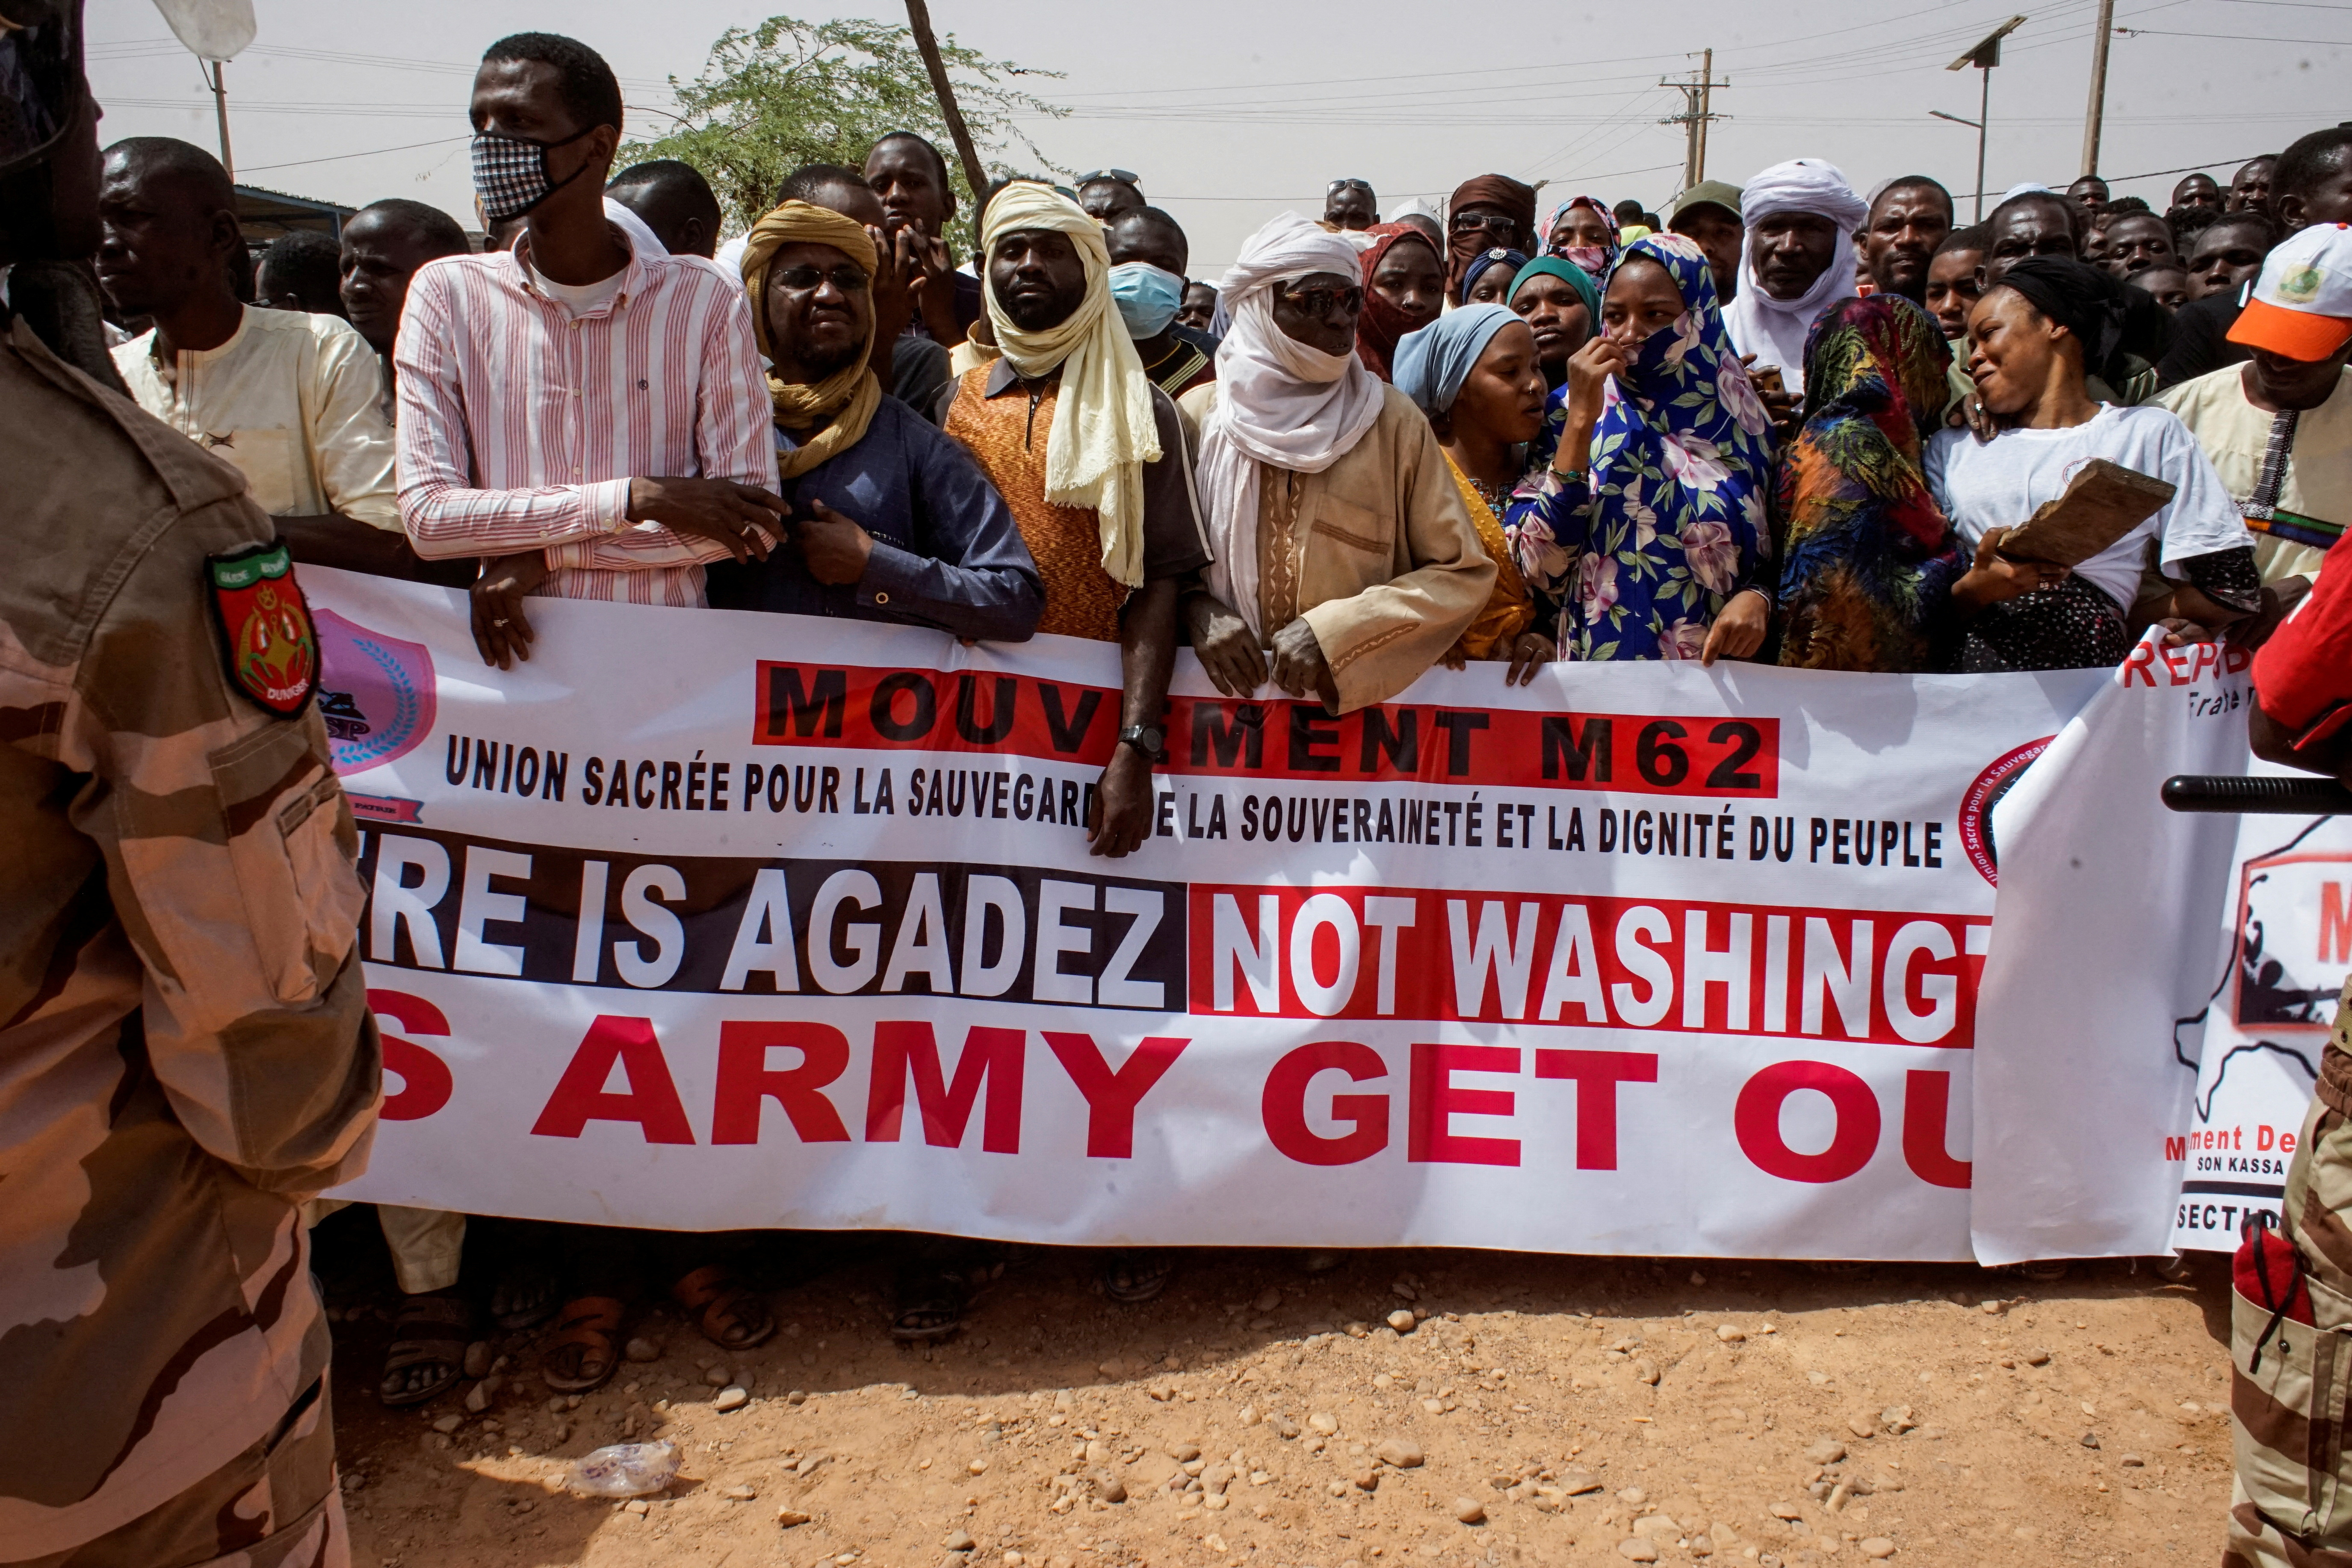 Nigeriens demonstrate to protest against the U.S. military presence, in Agadez